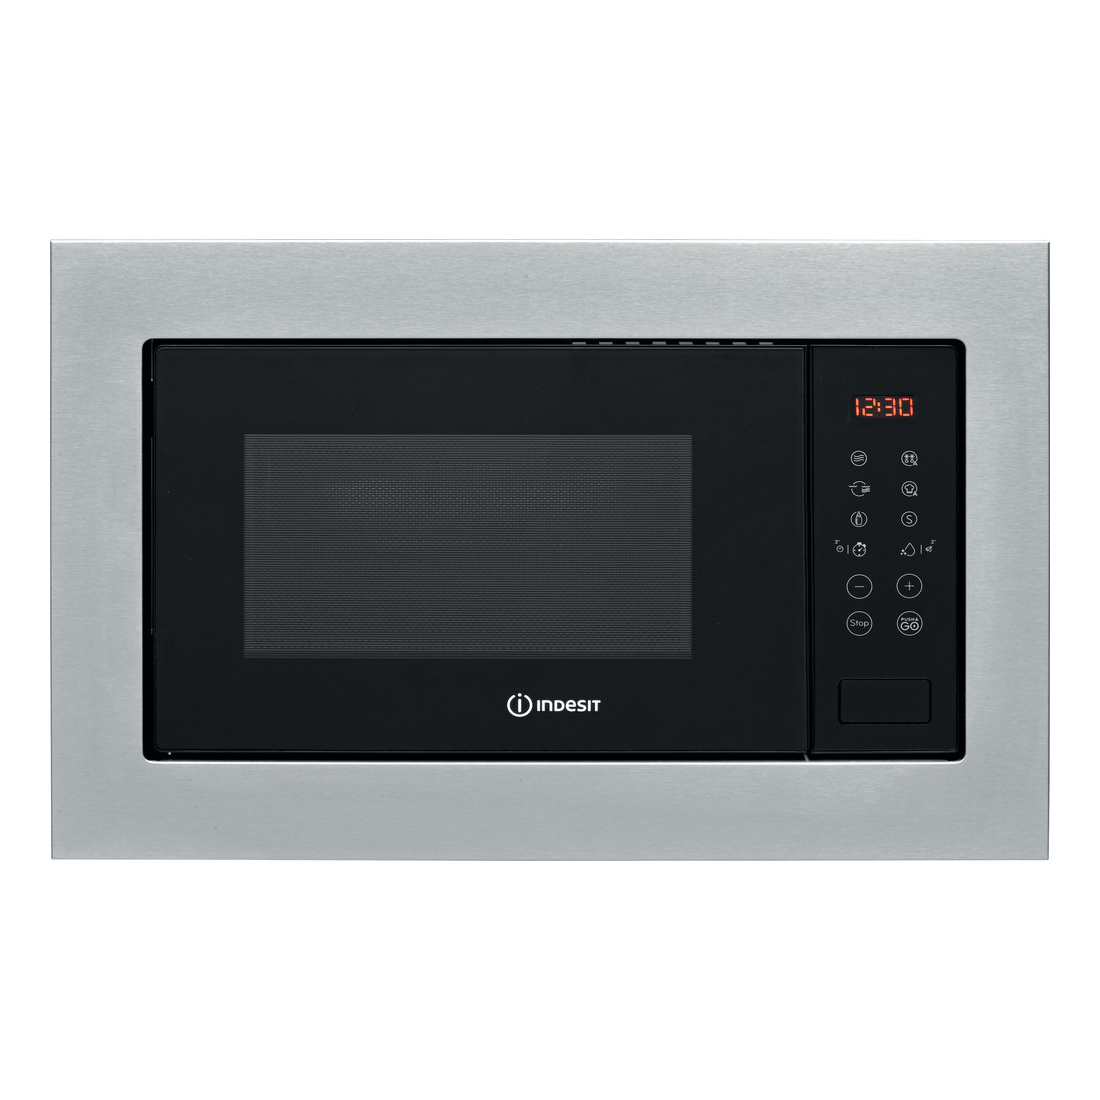 Indesit MWI125GXUK Built In Microwave Oven Grill in St Steel 25L 900W